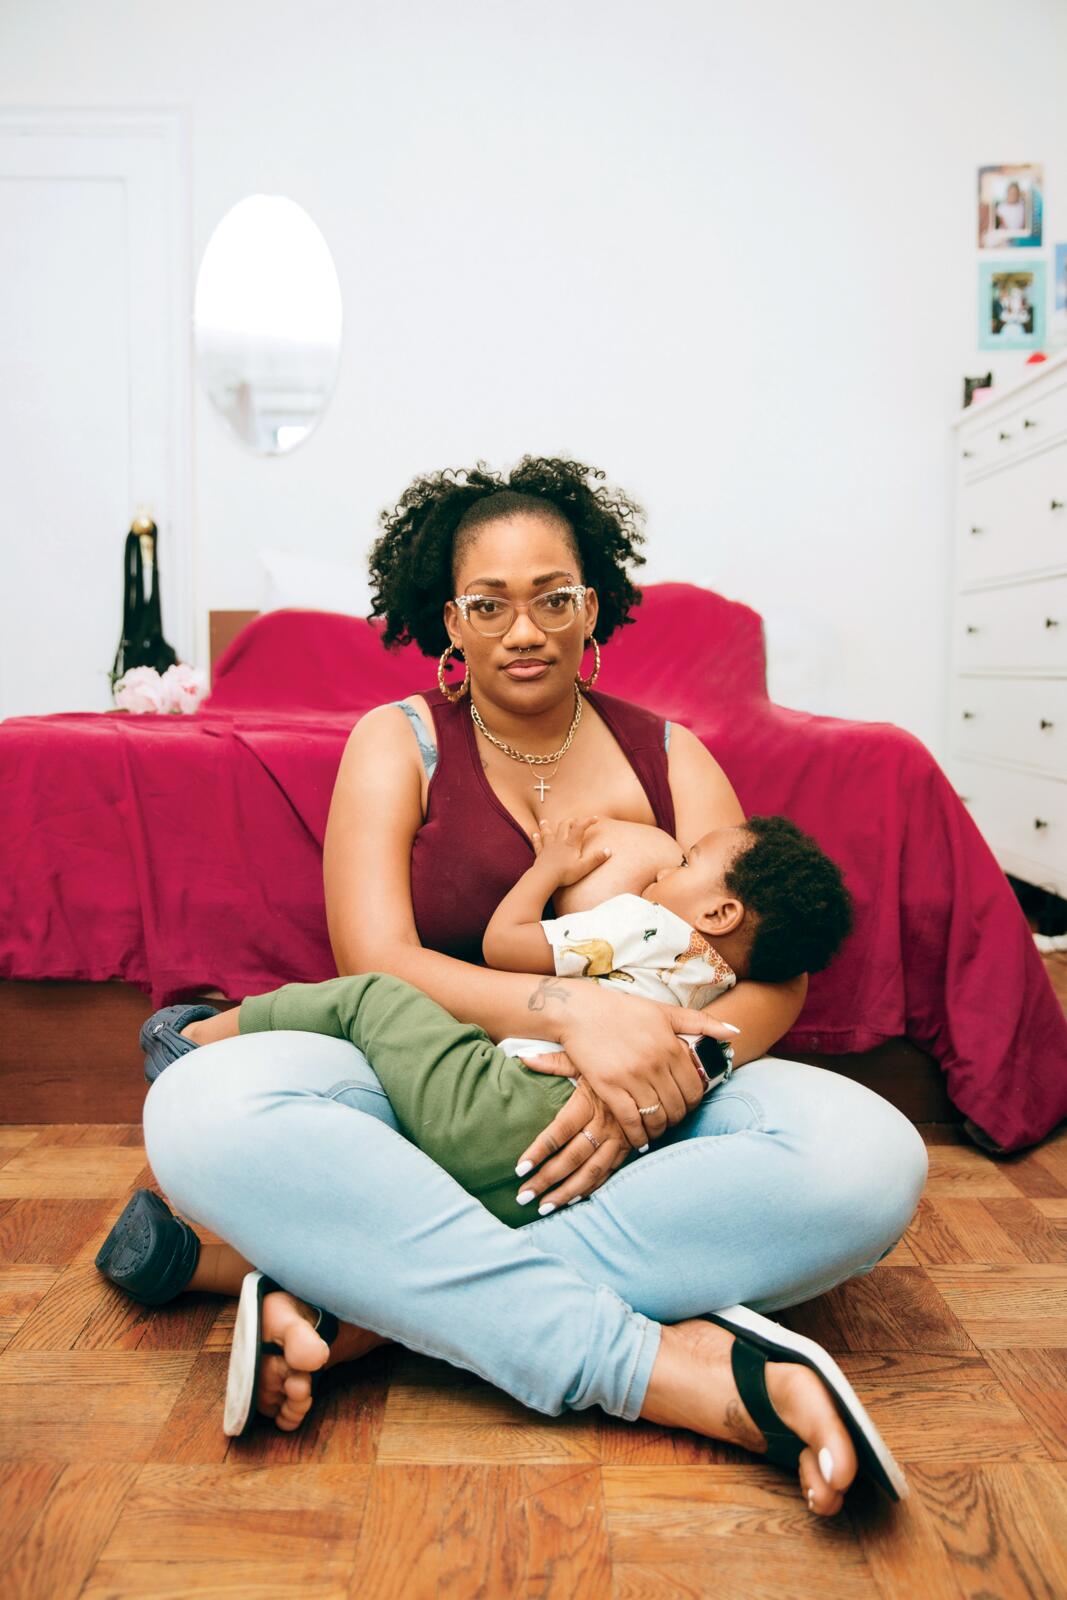 Black Mothers and Breastfeeding